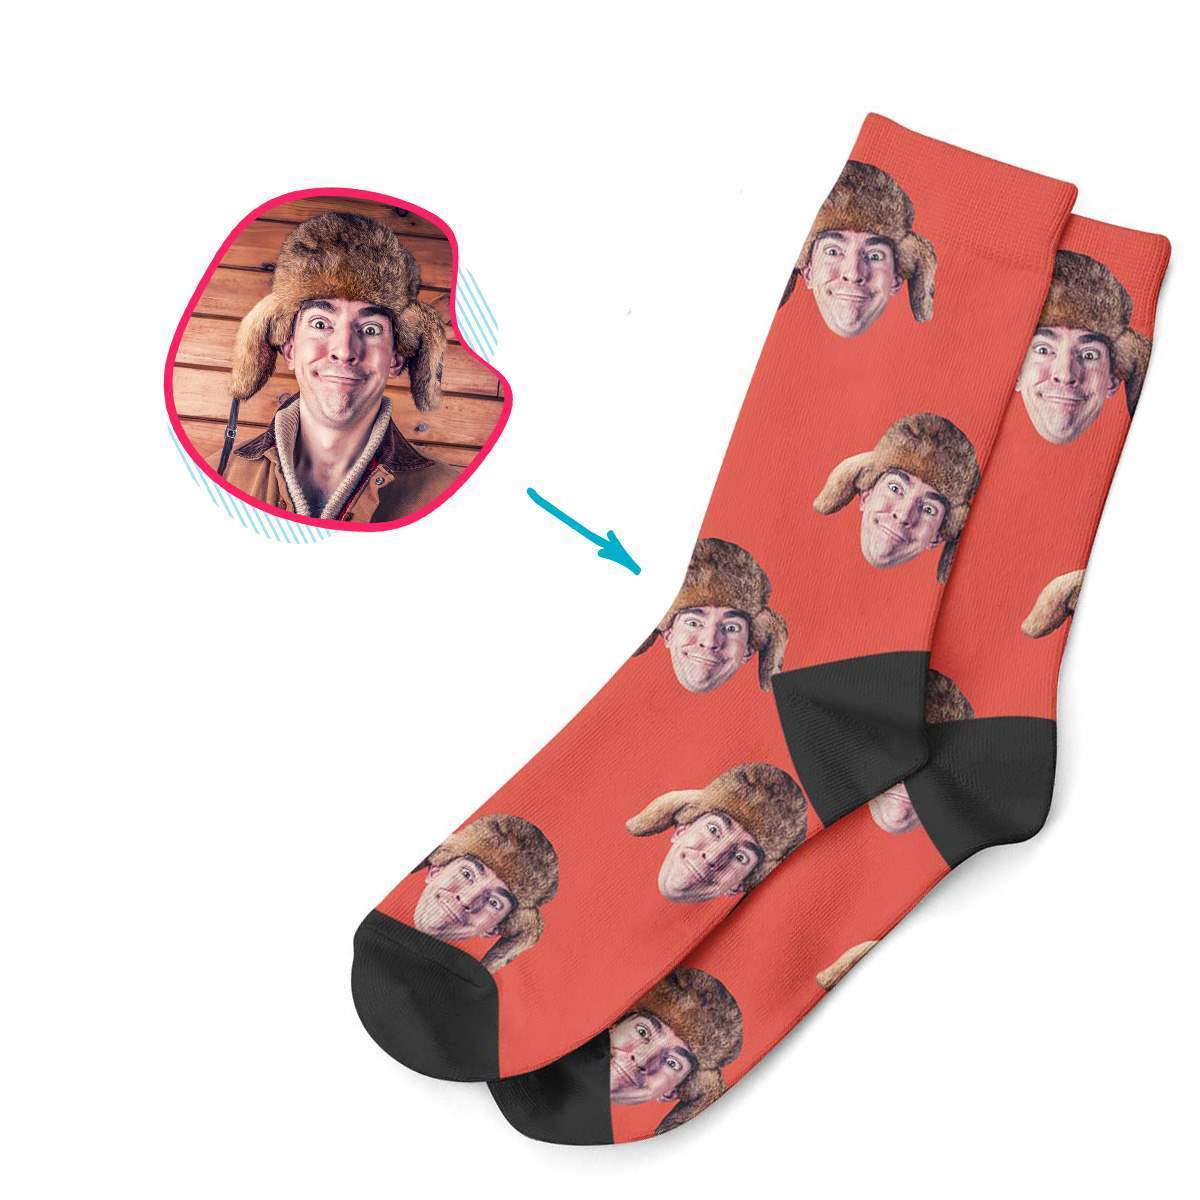 red Blank design socks personalized with photo of face printed on them